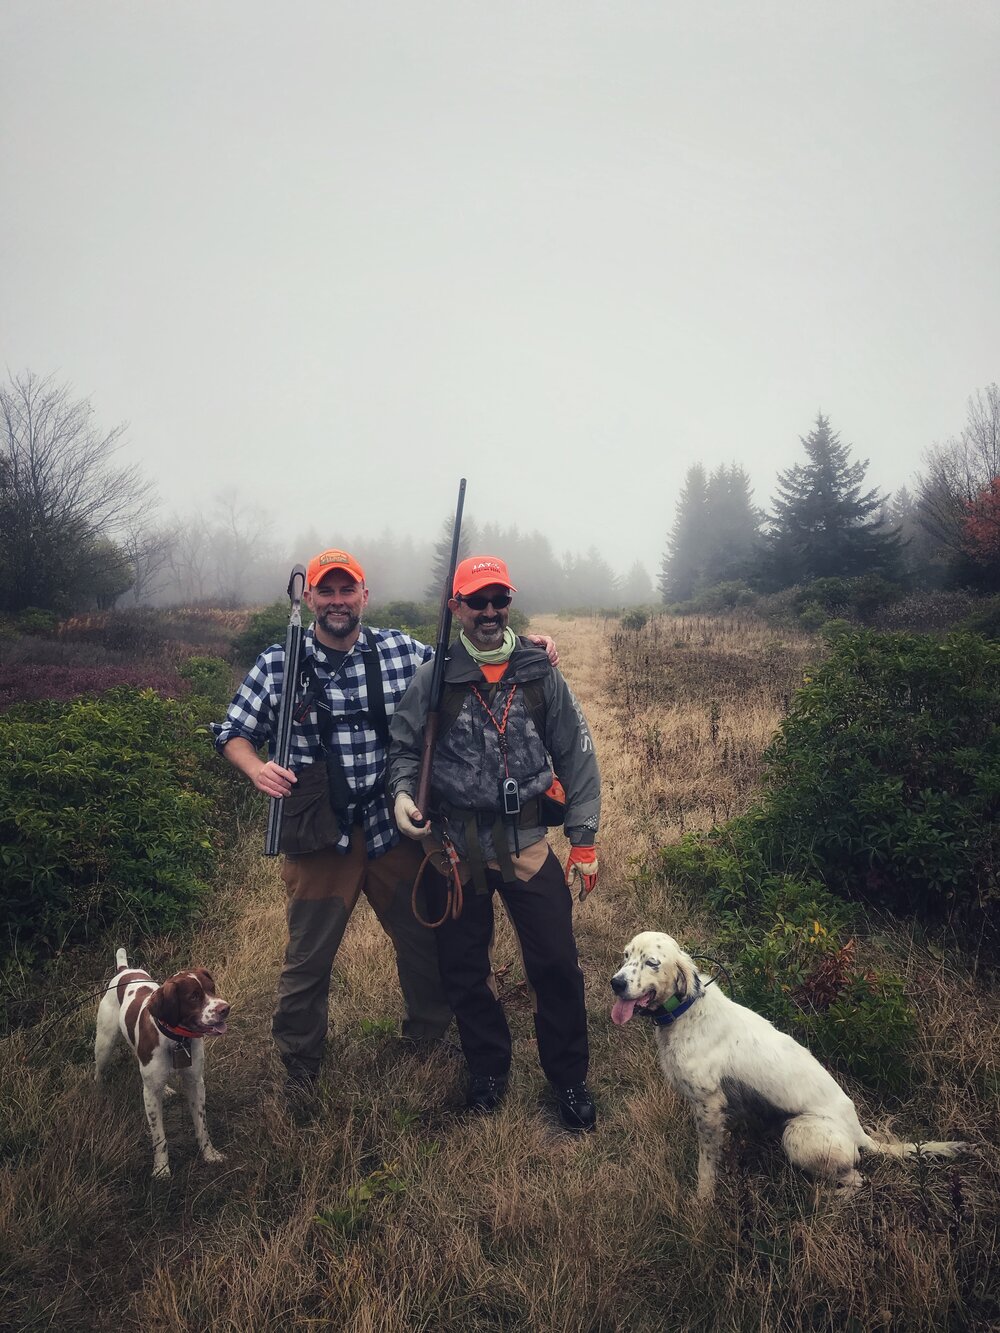  Out of the yard and into the field - training buddies hitting the mountains for wild birds 